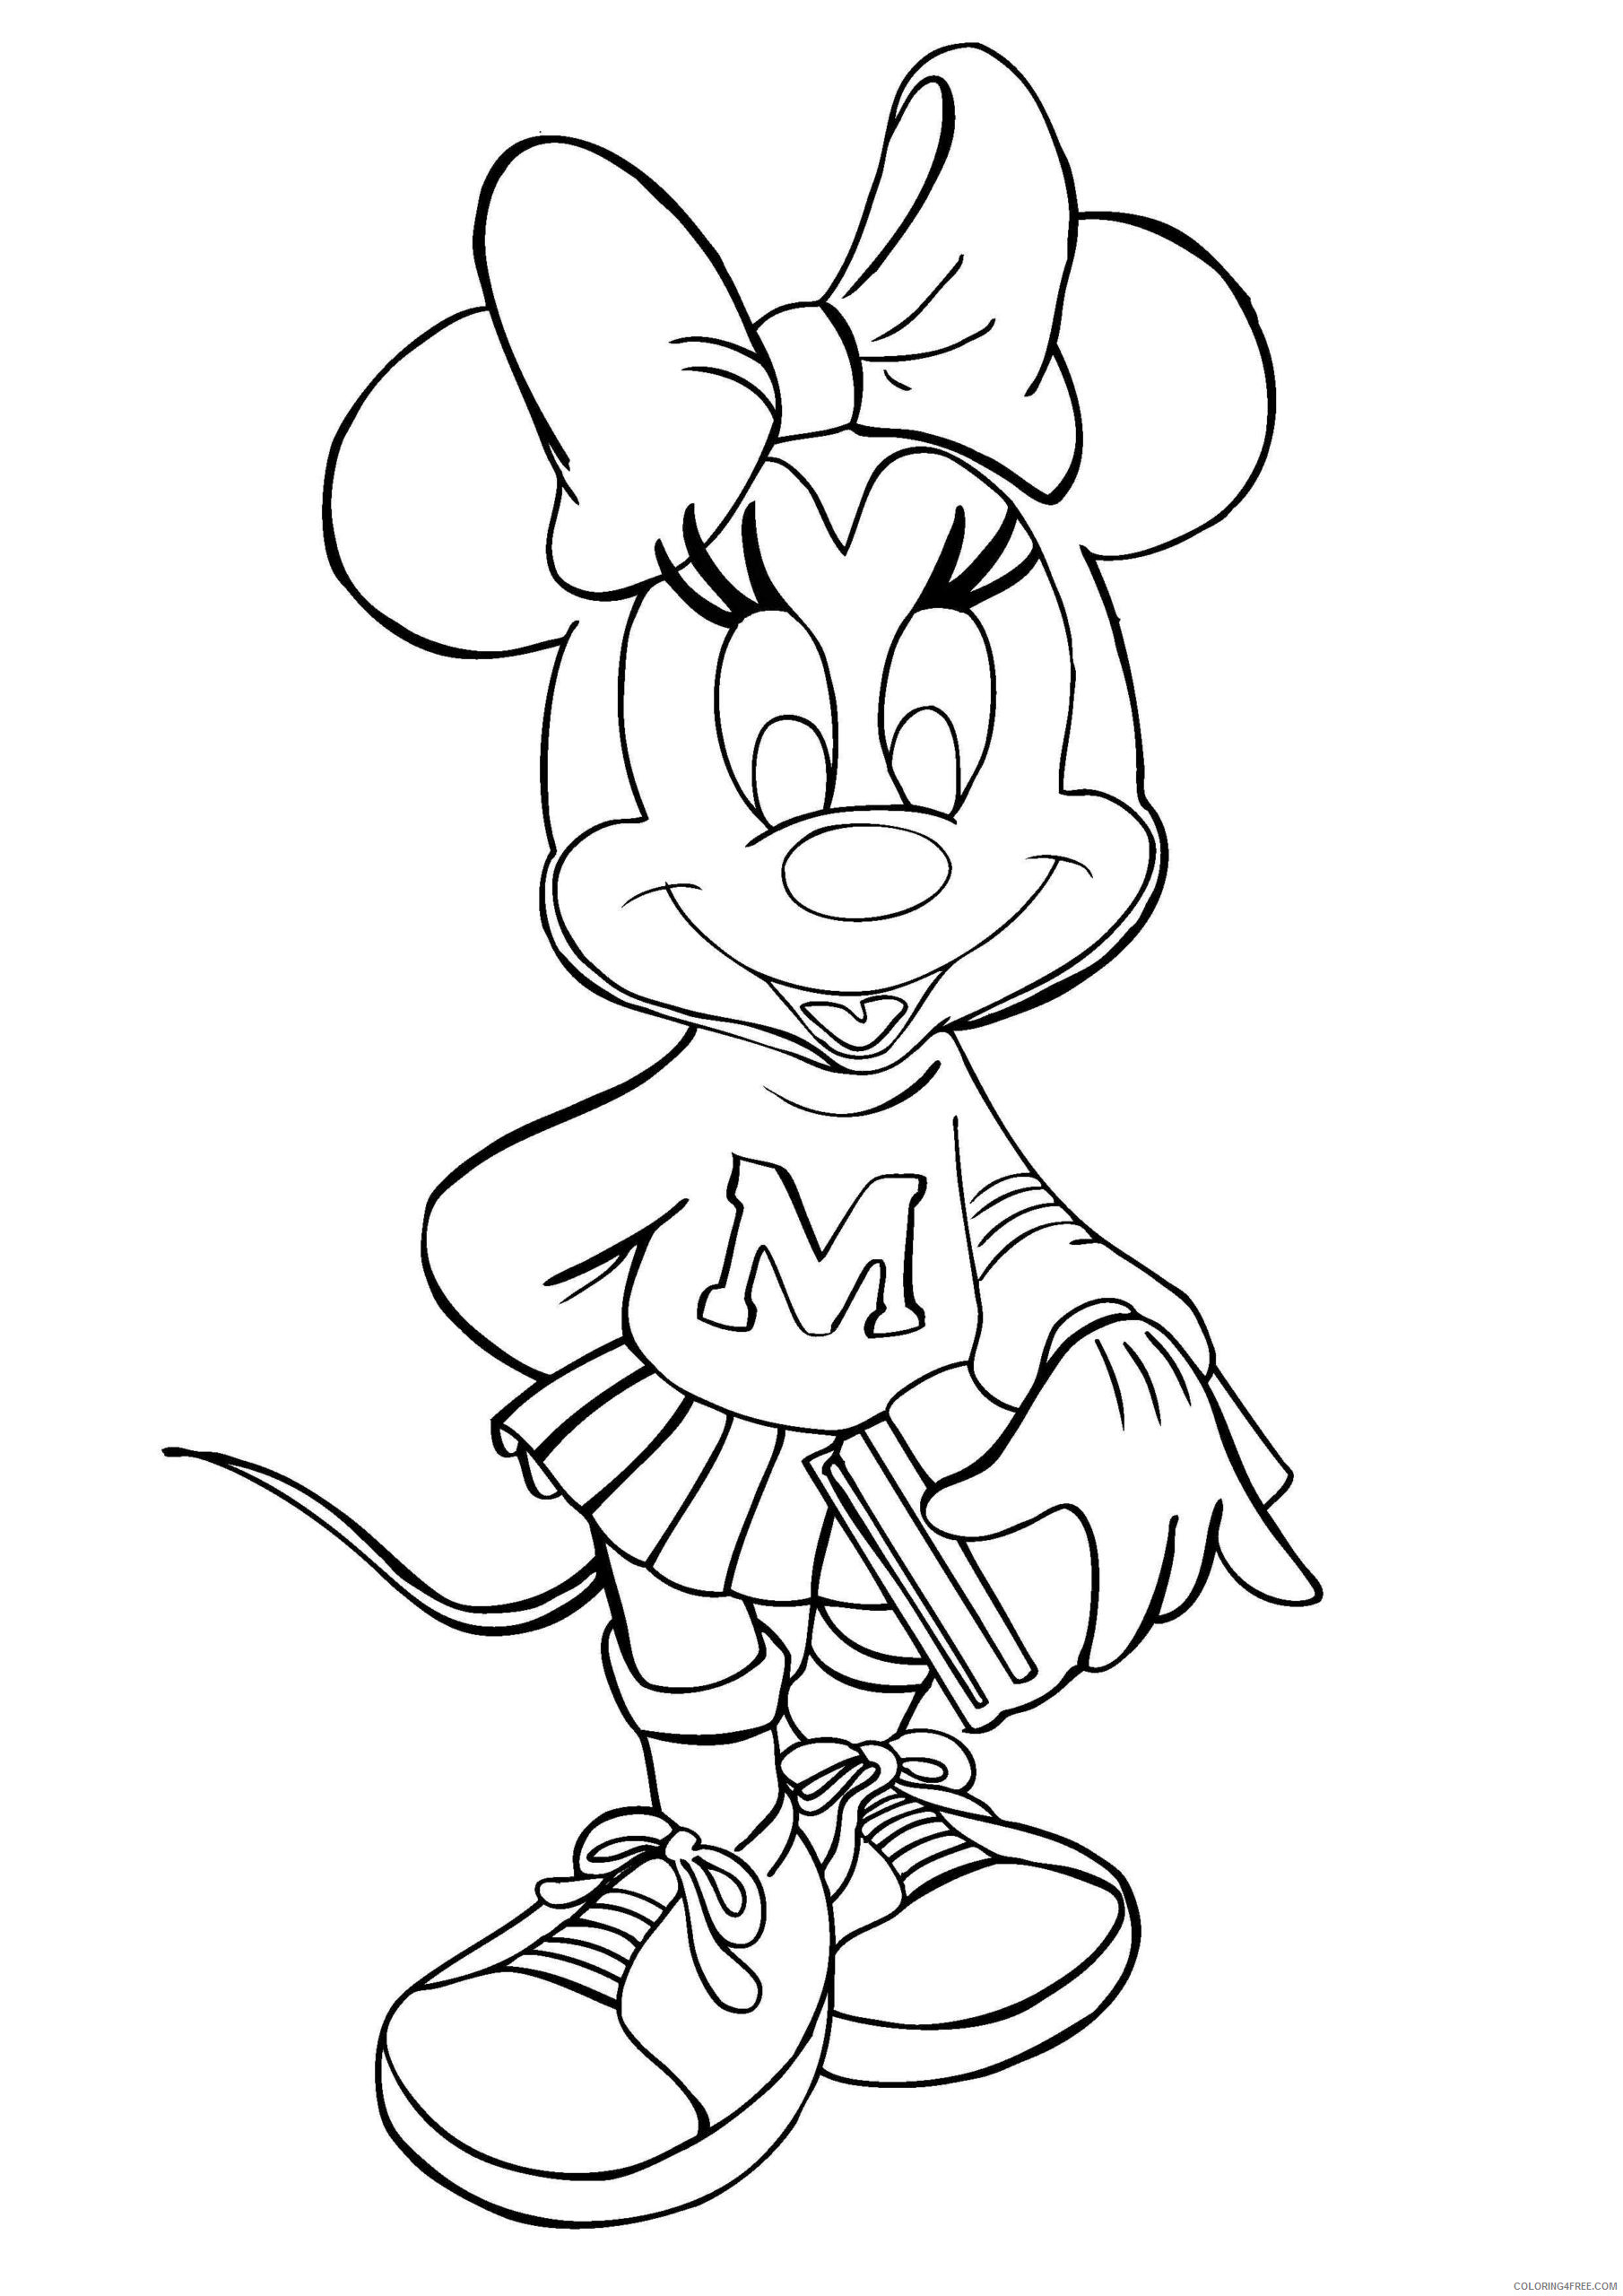 Minnie Mouse Coloring Pages Cartoons Disney Minnie Mouse Printable 2020 4233 Coloring4free